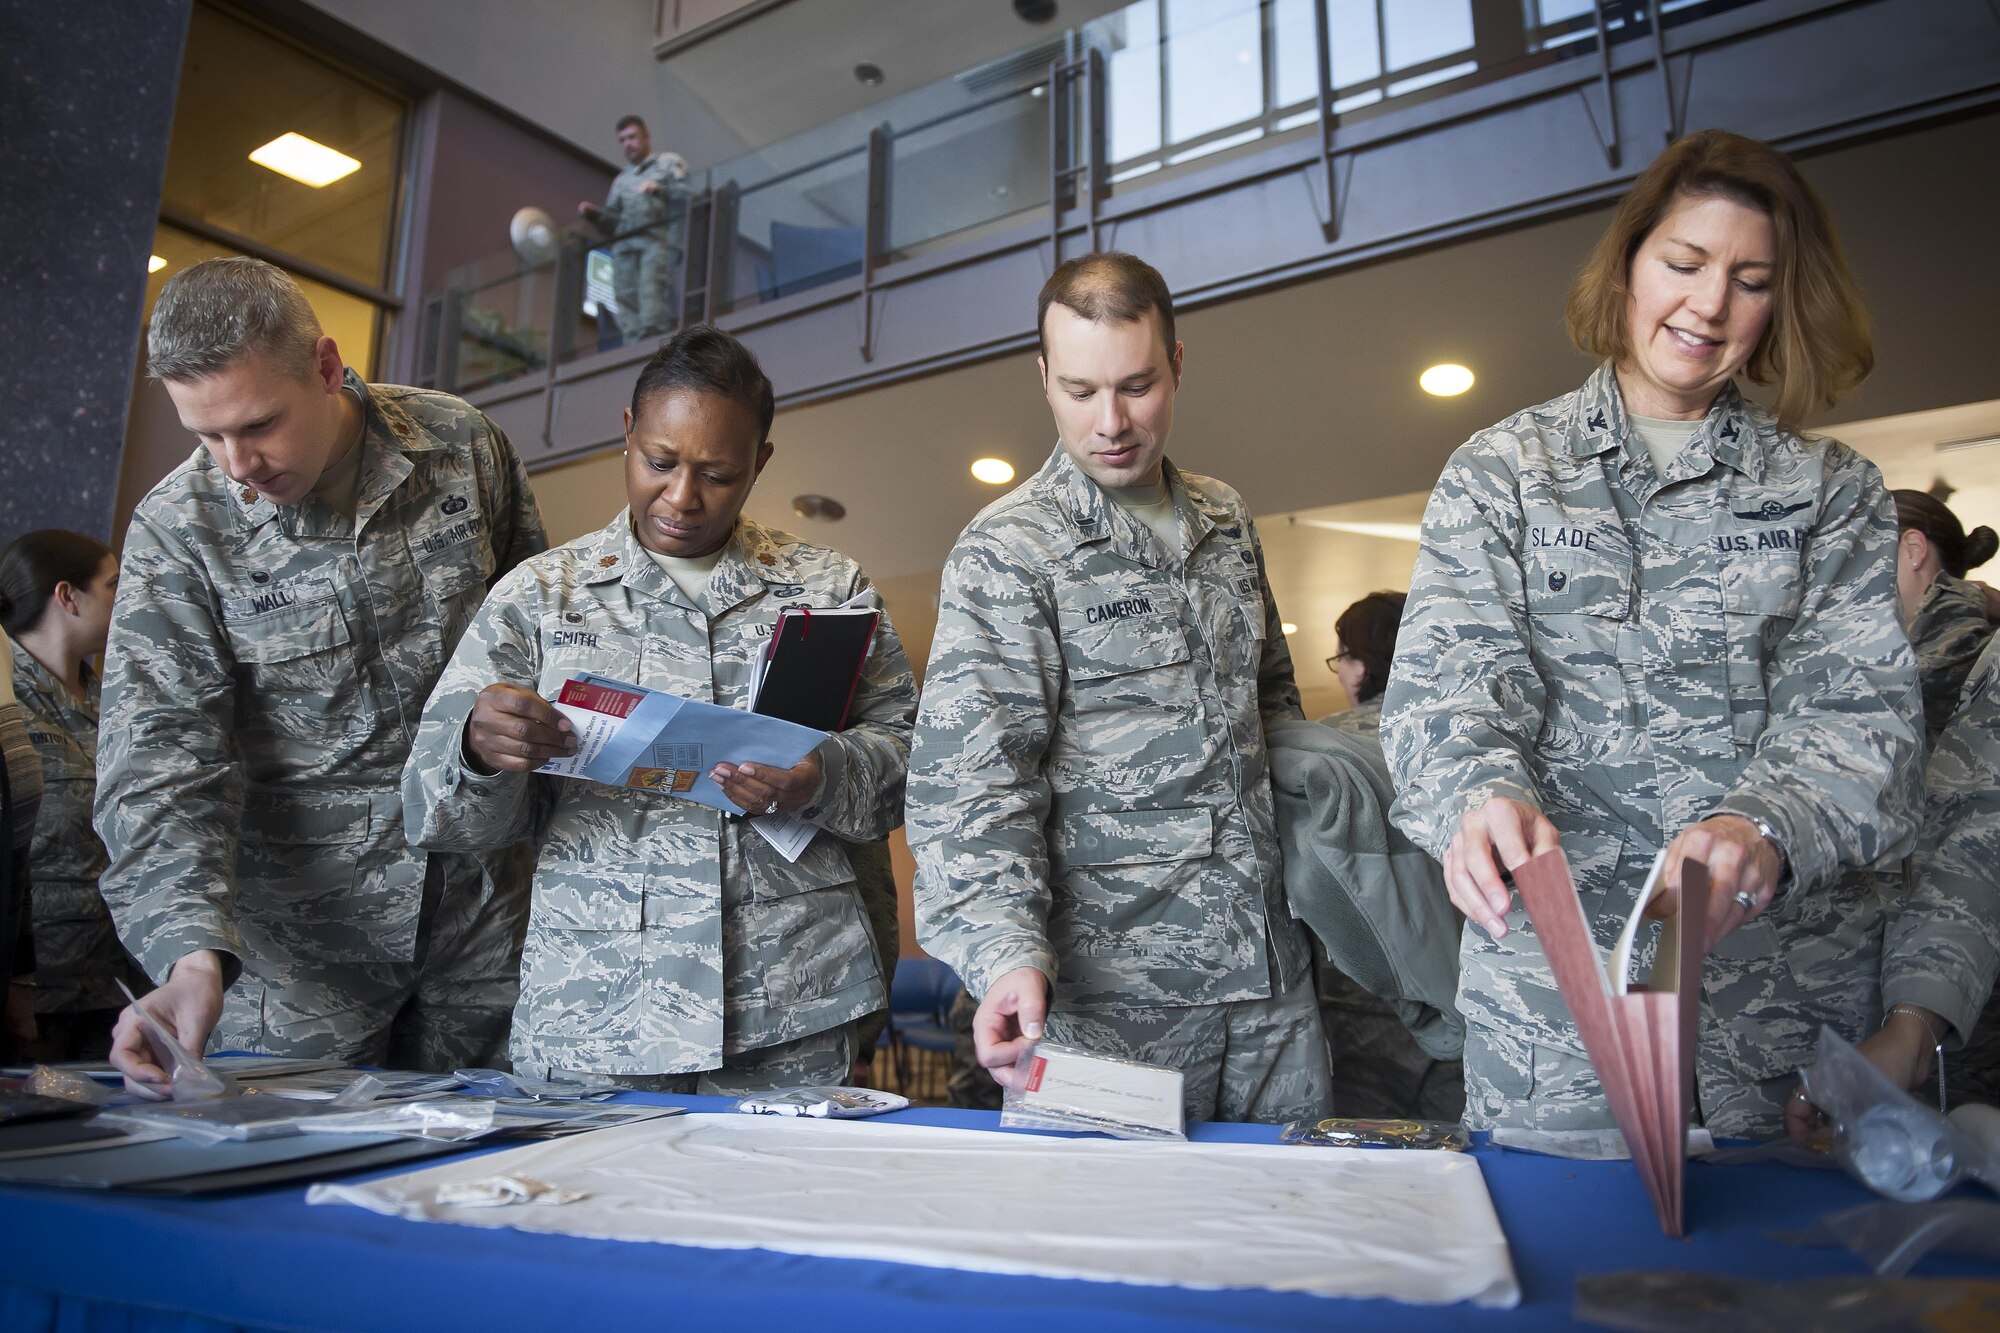 Col. Robyn Slade (right), 50th Space Wing senior individual mobilization augmentee to the commander, browses the contents of the 50 SW time capsule, opened at Schriever Air Force Base, Colorado, January 31, 2017. Being IMA to the commander of the wing during this moment in history is one of the many ways Slade has served the 50 SW during her last years of service. (U.S. Air Force Photo/Dennis Rogers)